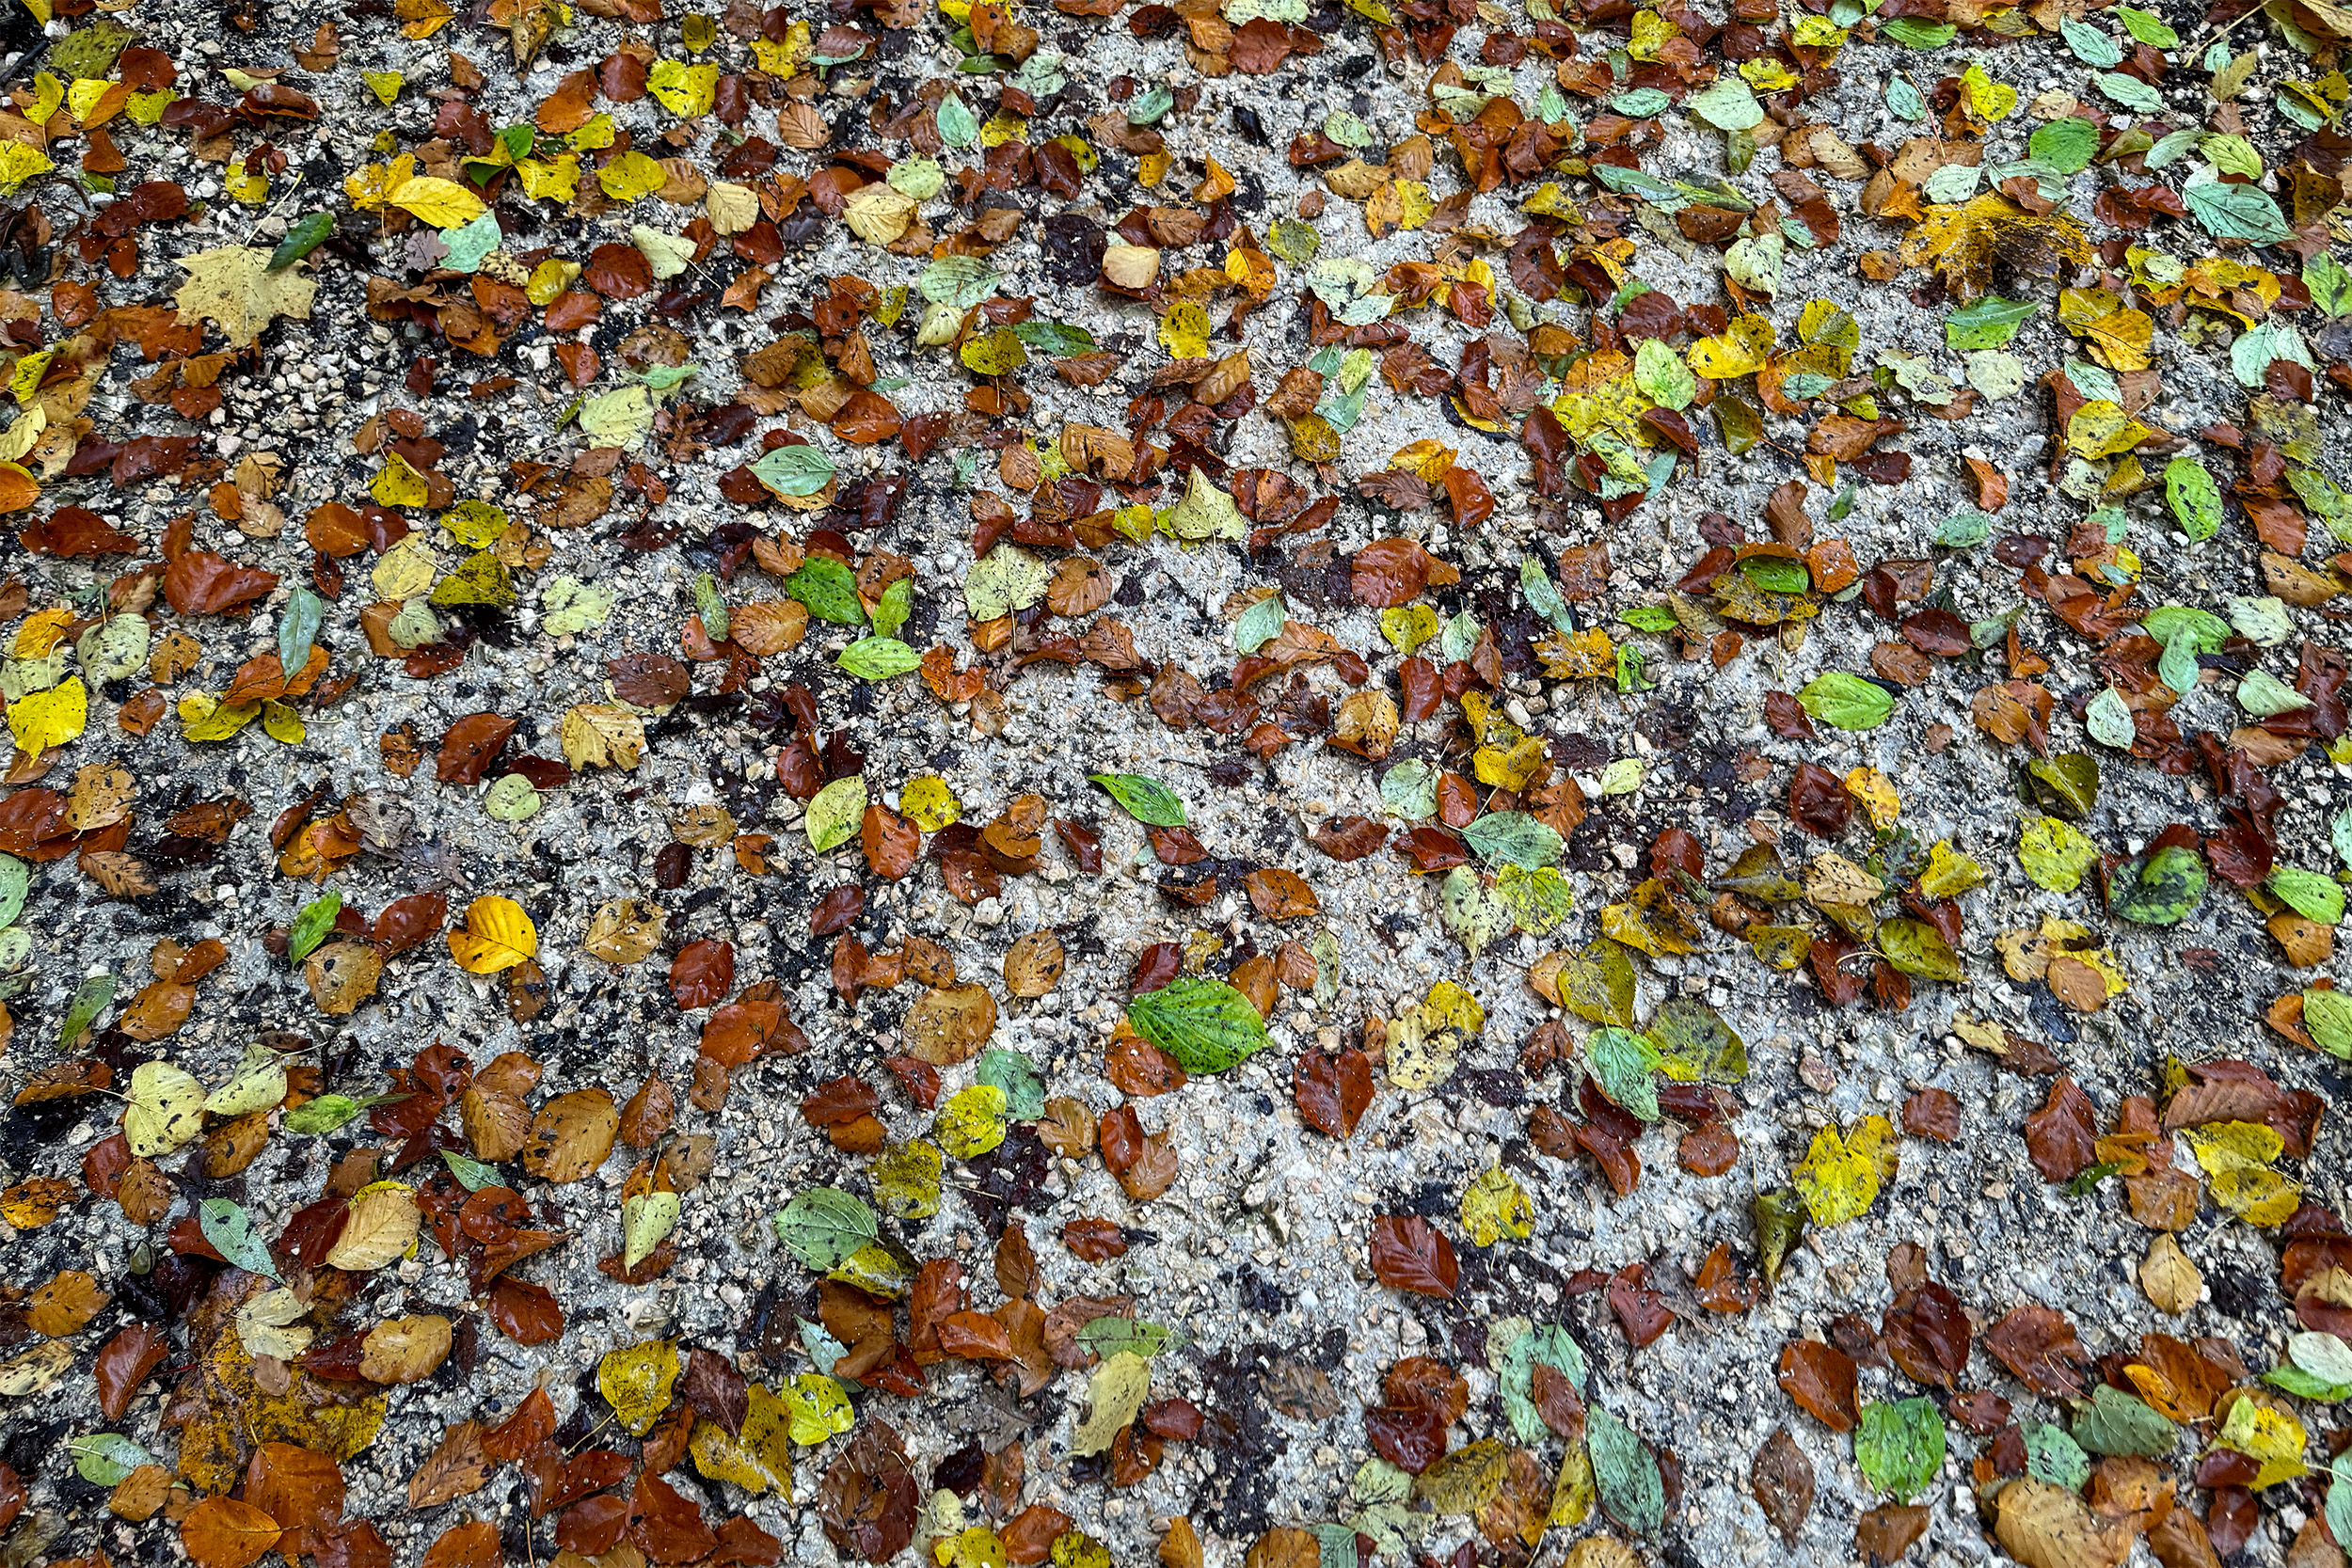 Colorful autumn colors on the ground, during yesterdays commute.